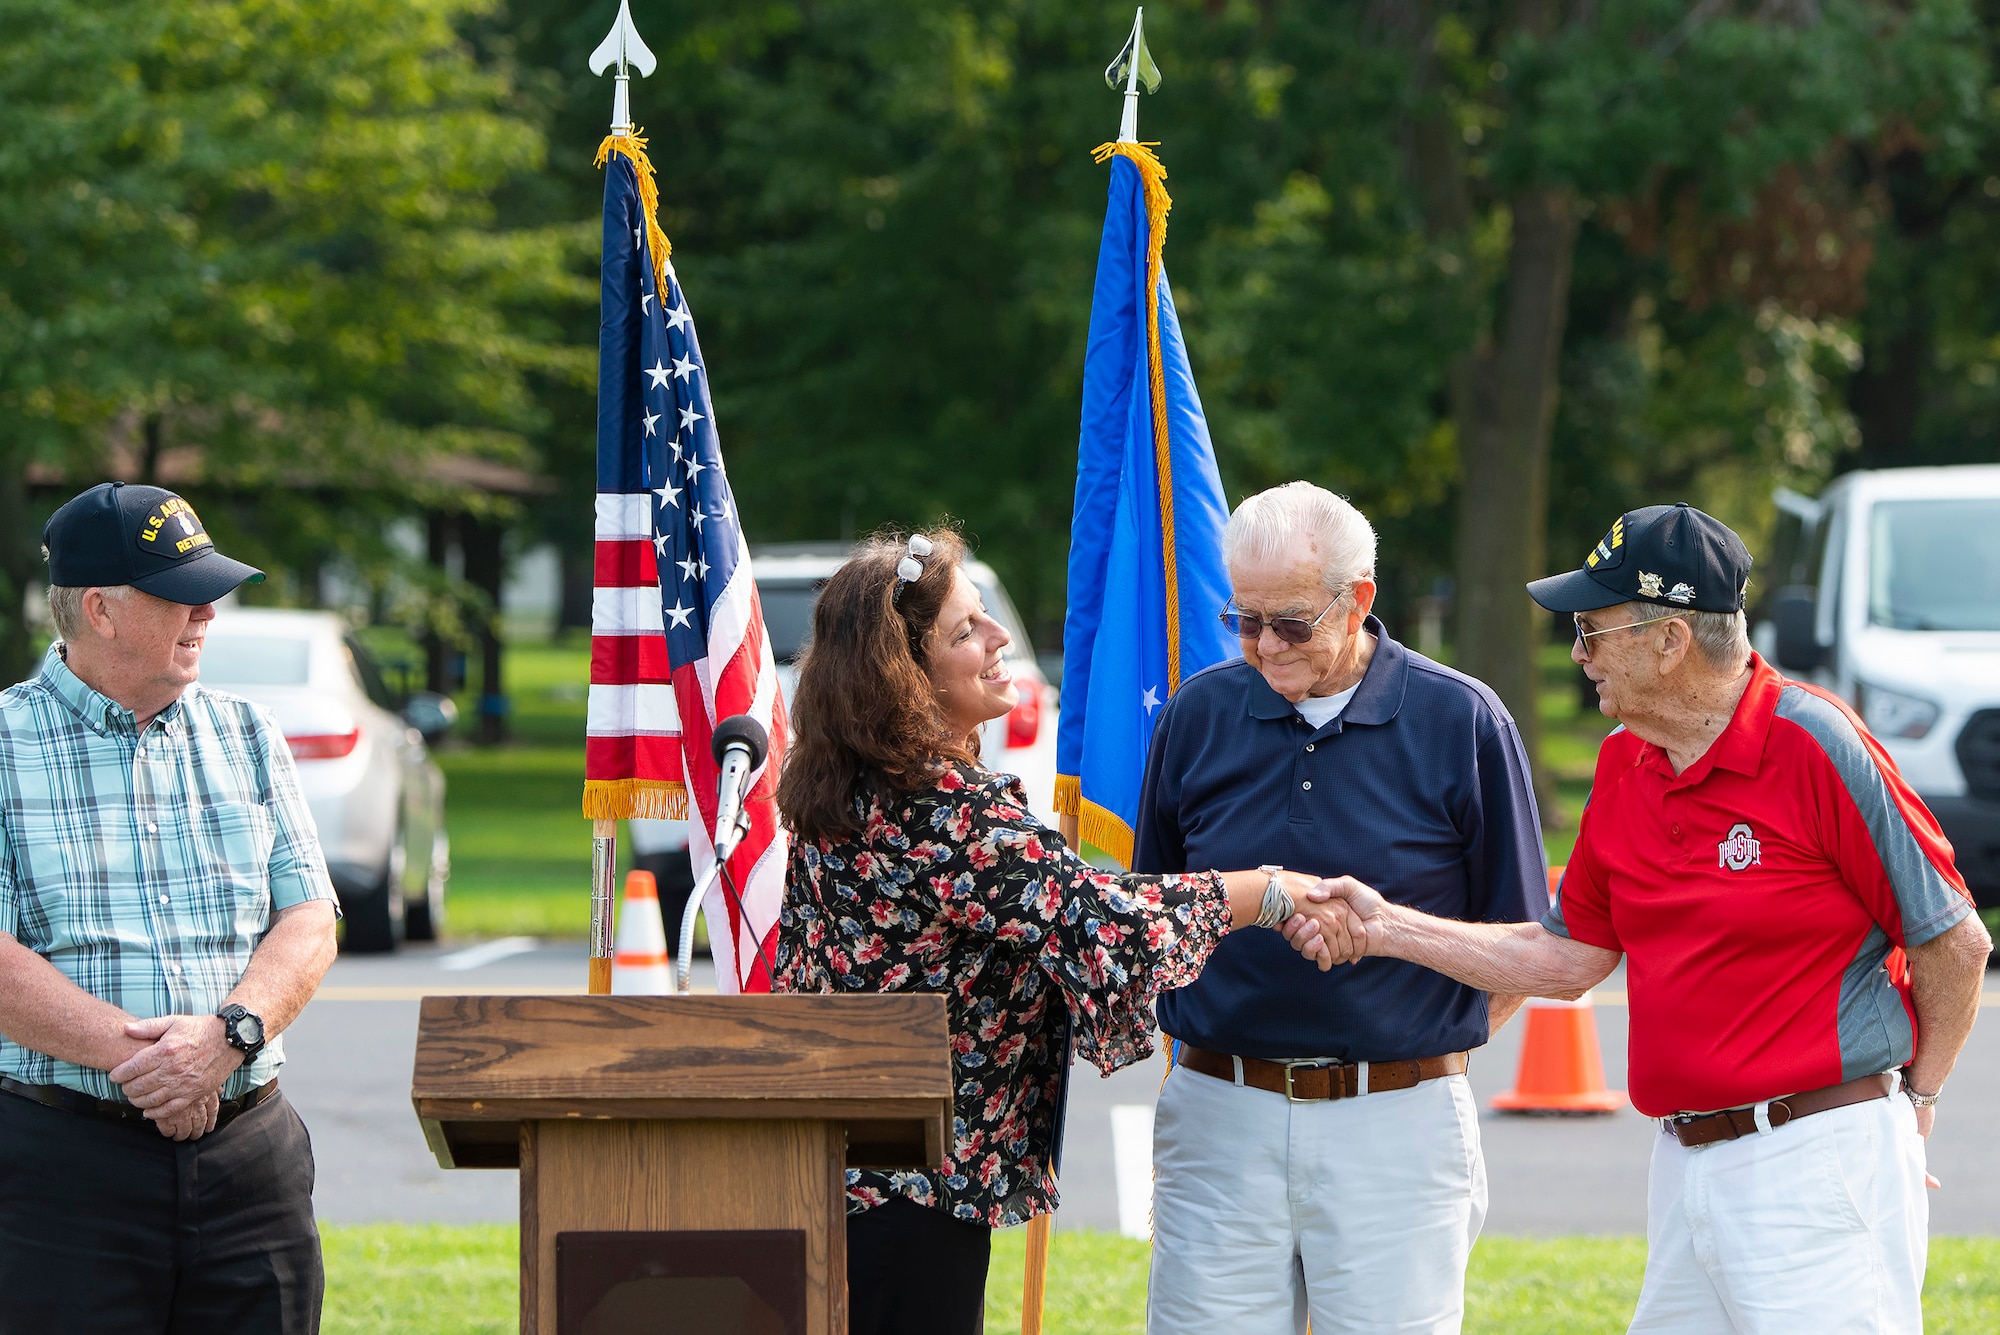 Sandra Brasington, Gov. Mike DeWine’s western Ohio regional liaison, thanks the surviving Litten brothers—Steve (left), Jerry (center) and Larry— for their service in the Air Force during a ceremony July 20, 2021, at the National Museum of the Air Force, Wright-Patterson Air Force Base, Ohio. They, and an additional four brothers, served a combined total of 137 years in the U.S. Air Force. (U.S. Air Force photo by R.J. Oriez)